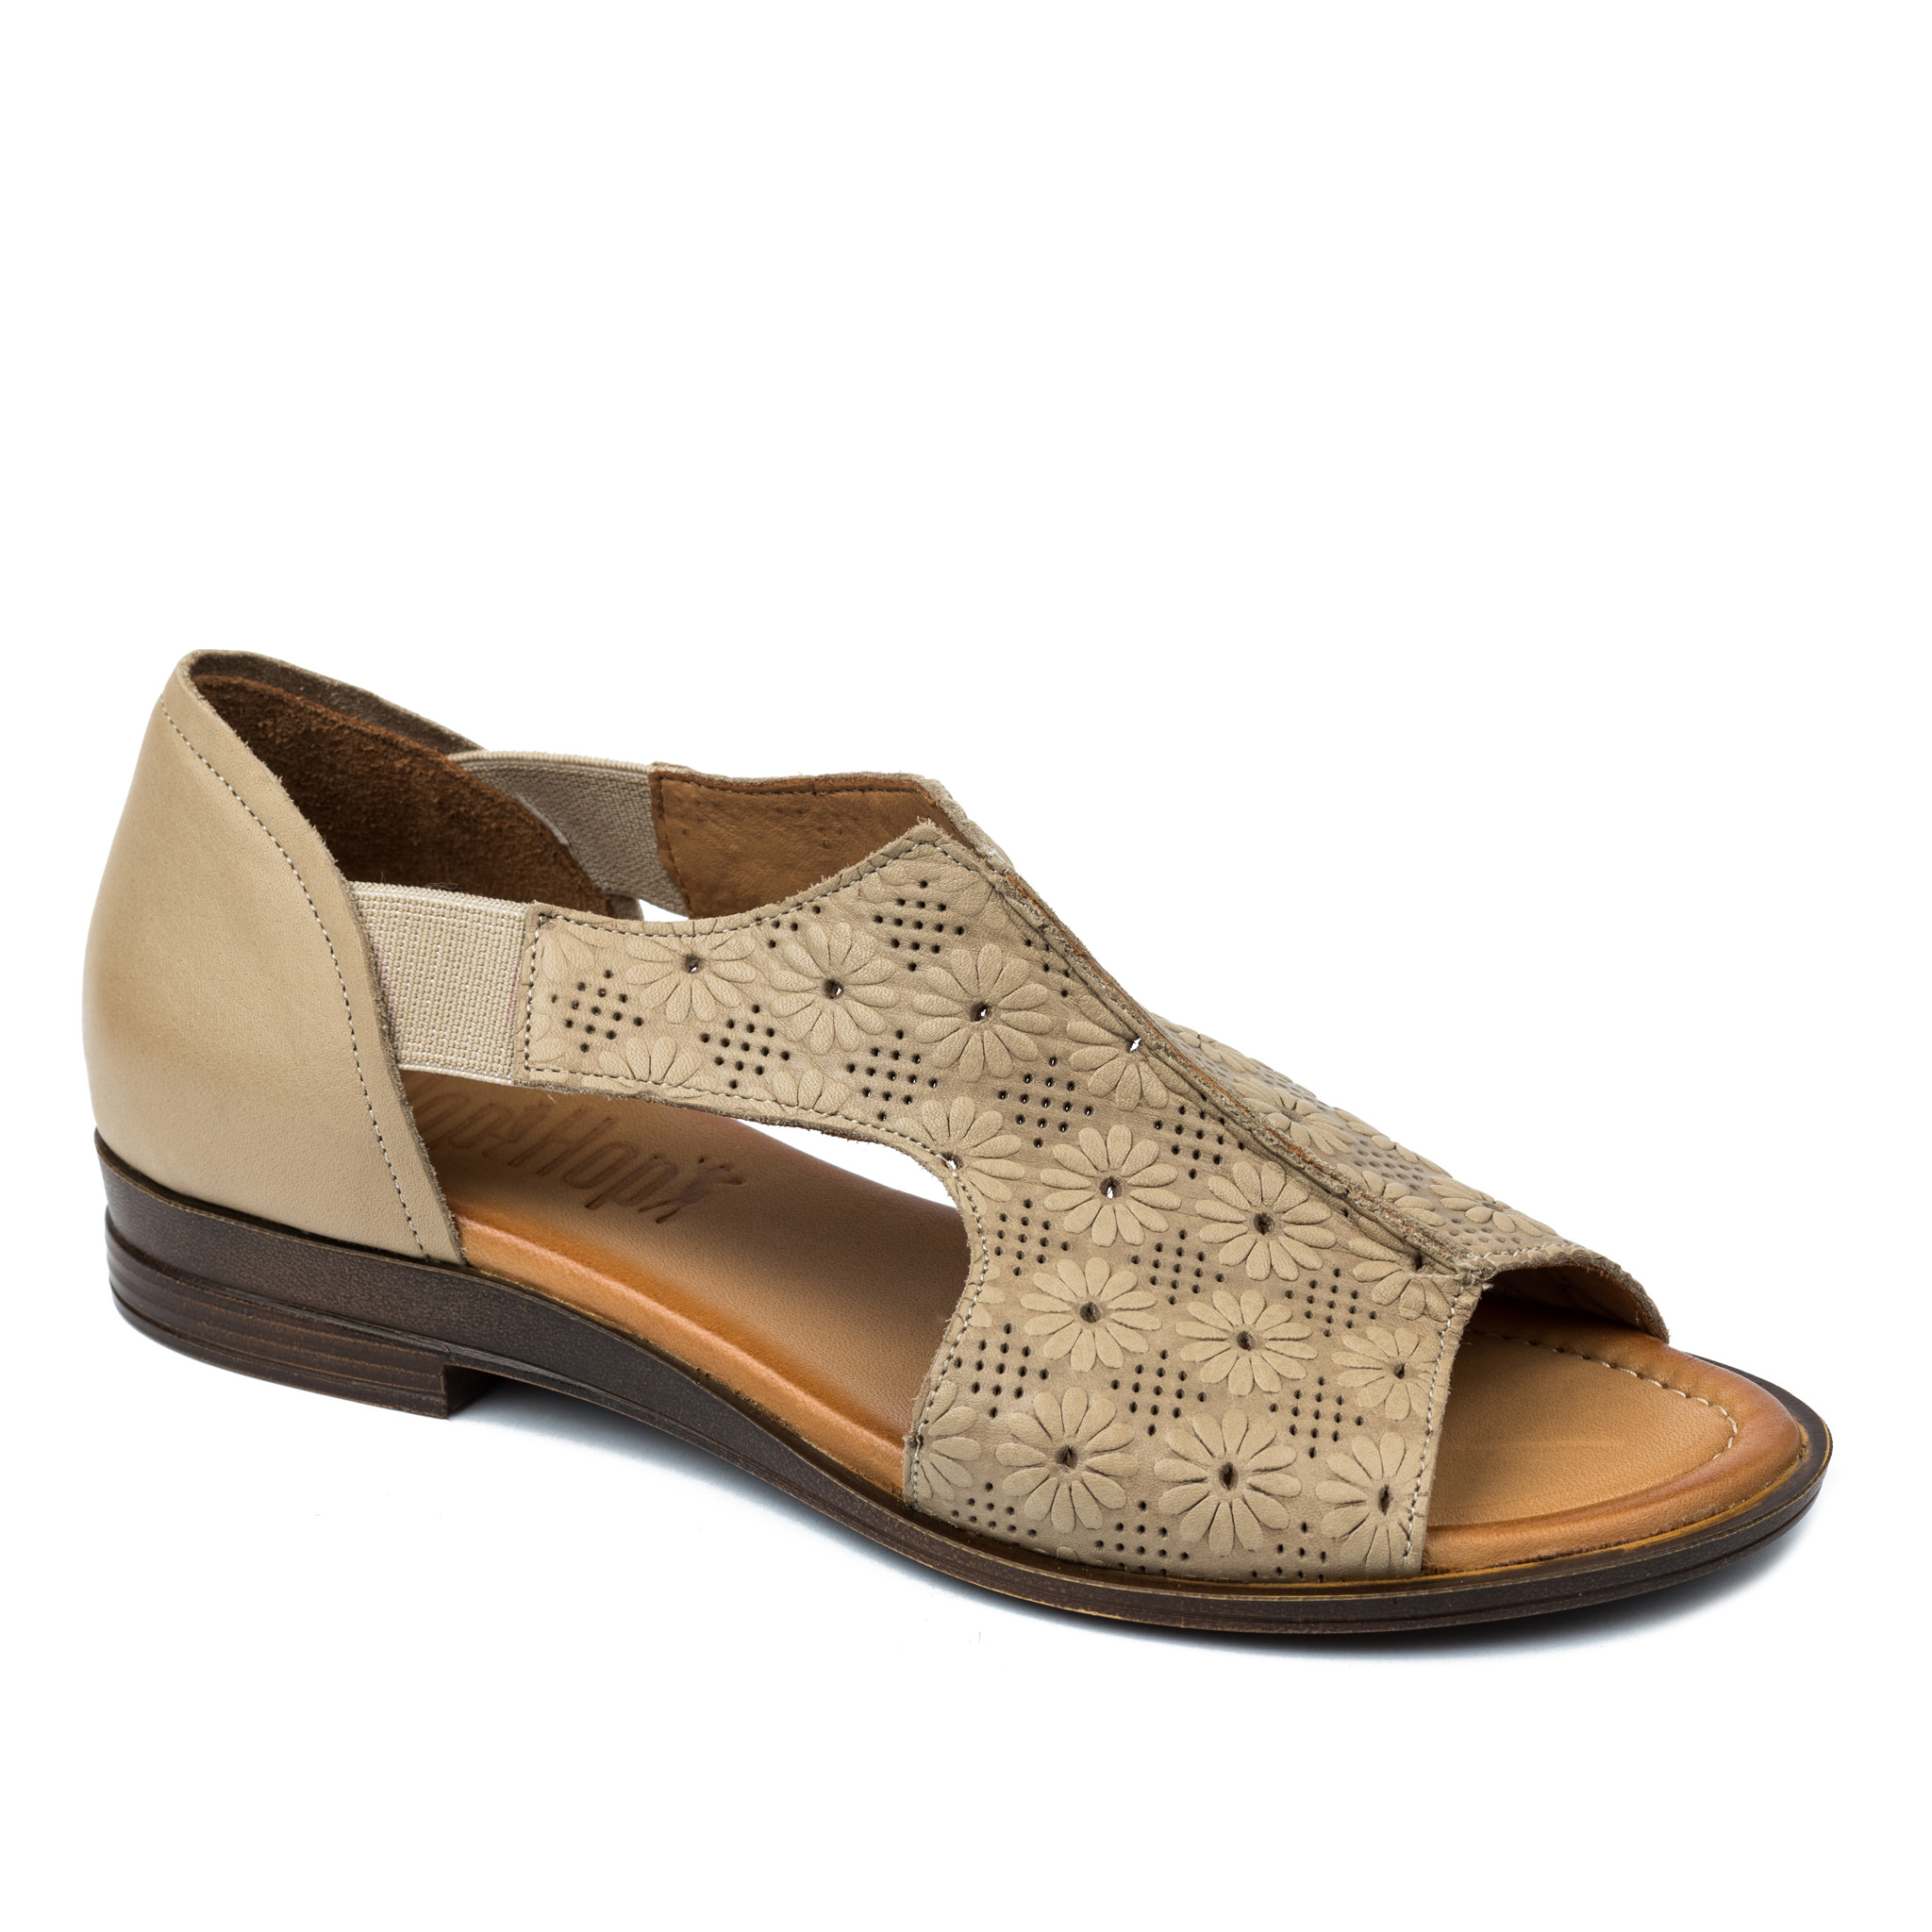 Leather sandals A705 - BEIGE